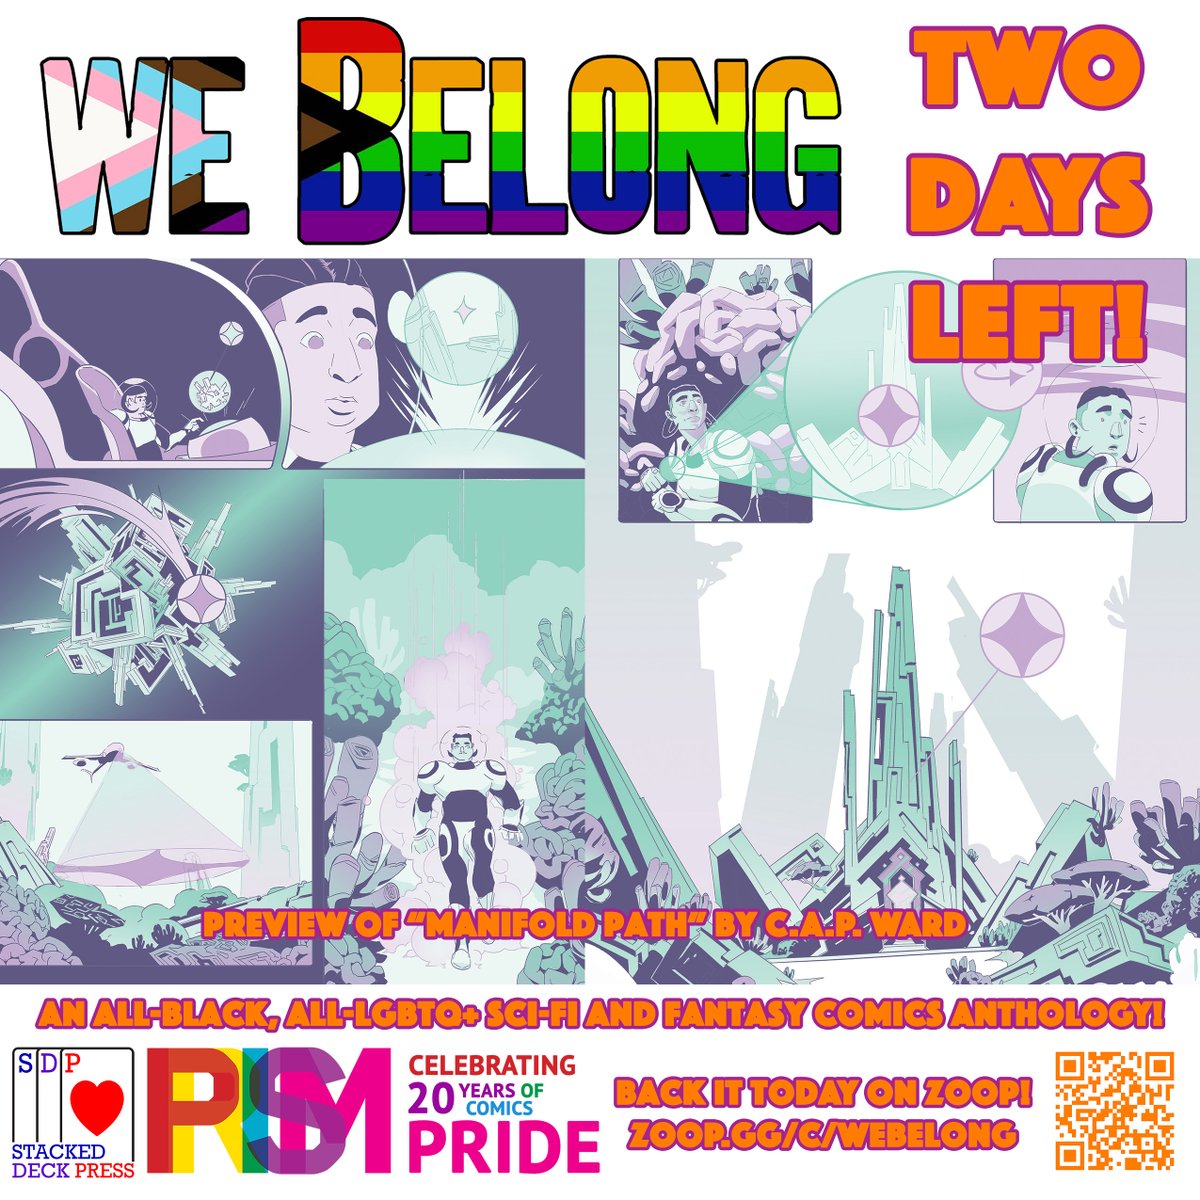 2 DAYS LEFT! #WeBelongComic the all-#Black, all-#LGBTQ+ sci-fi and fantasy comics anthology features over 20 amazing creators including @cevarra! Back this amazing project today on @WeAreZoop! zoop.gg/c/webelong #indiecomics #blackcomics #lgbtqcomics #crowdfunding